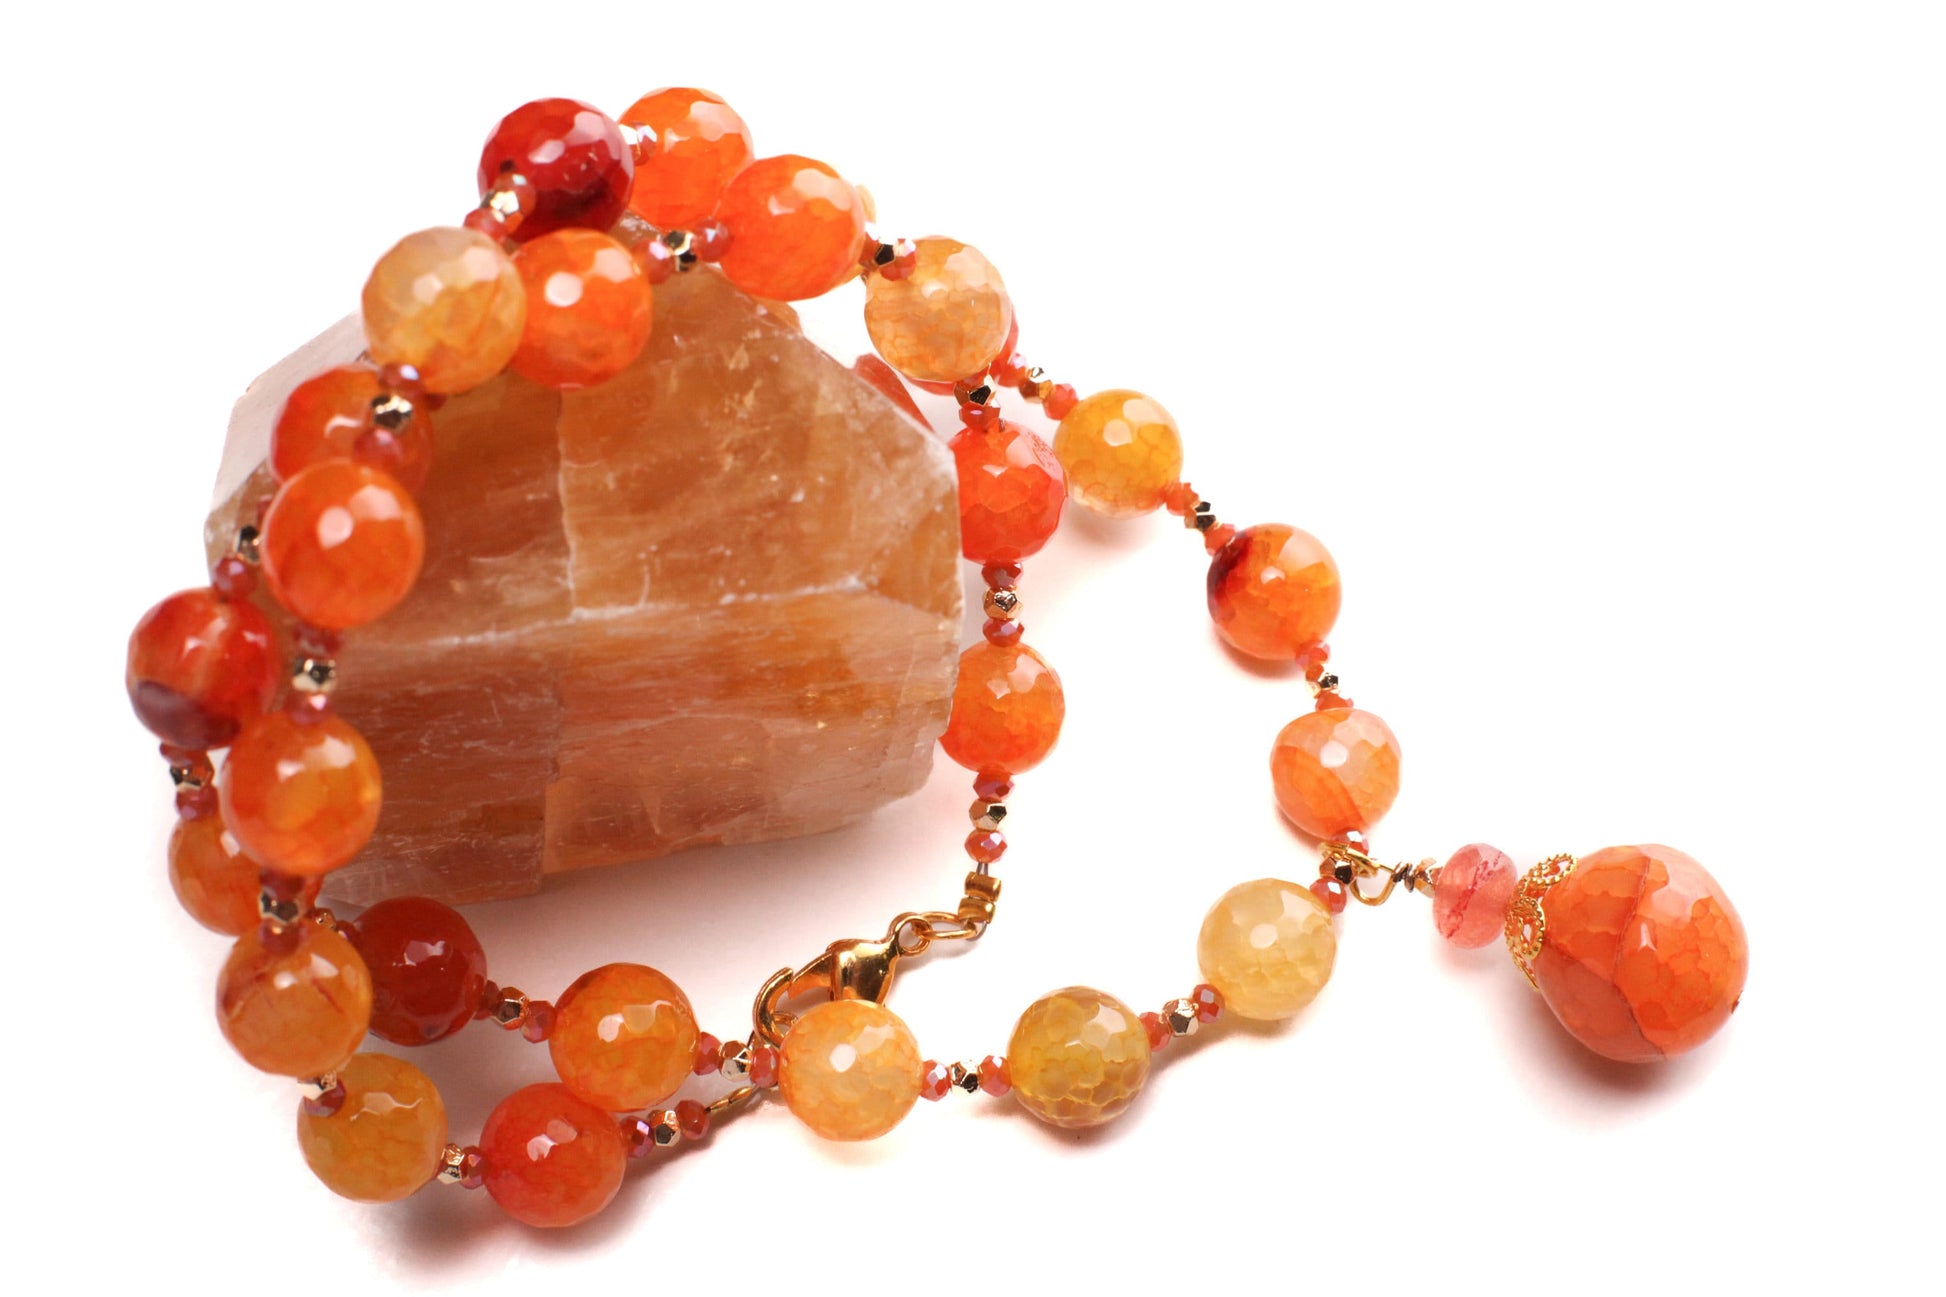 Orange Fire Agate 10mm Round Bead with 16mm Pendant Drop Gemstones Necklace